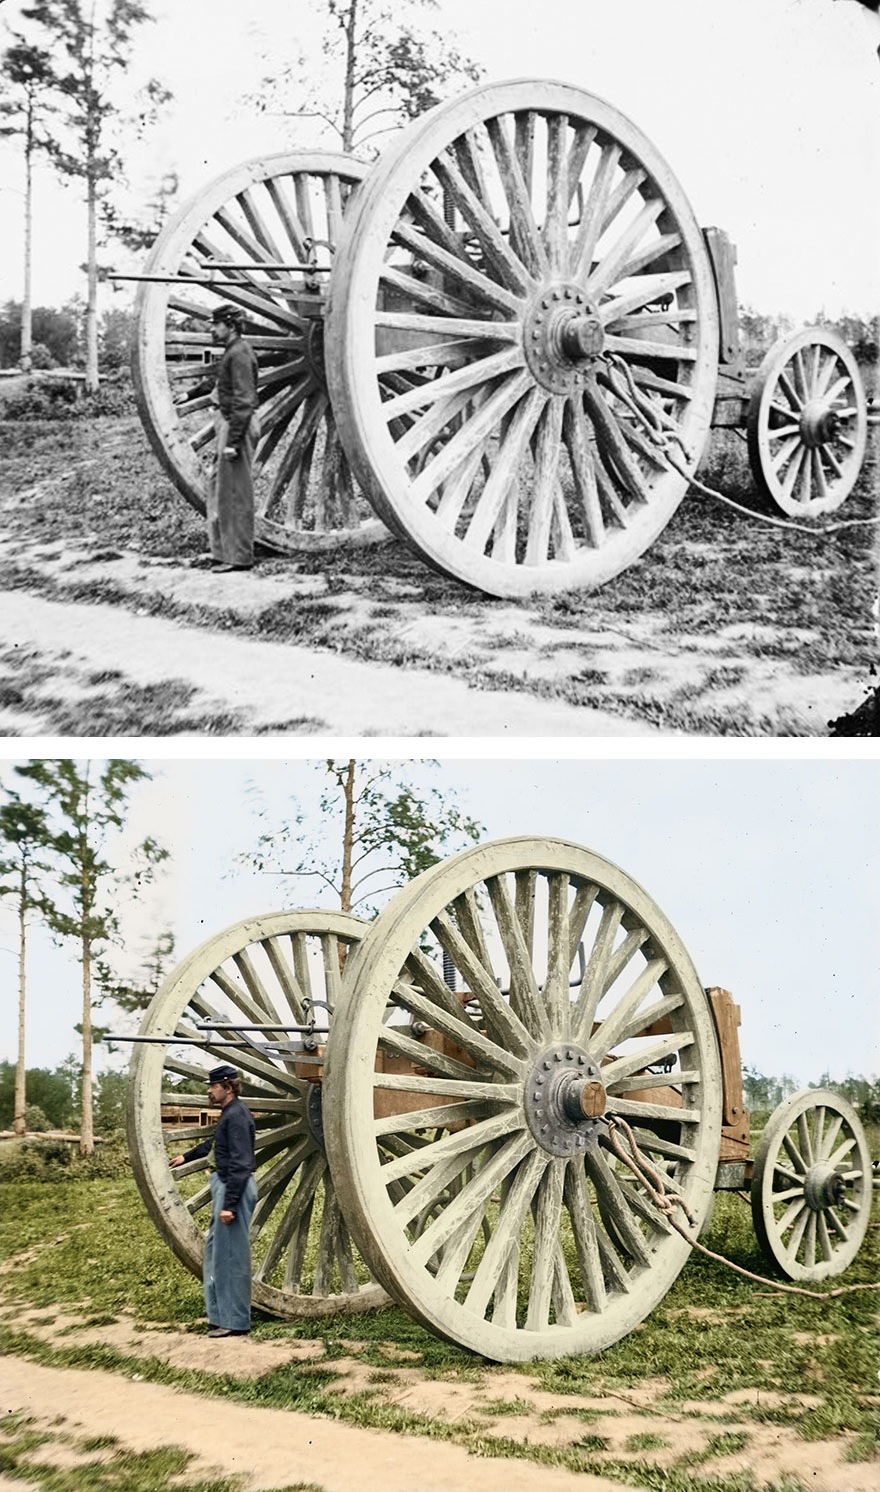 Drewry’s Bluff, Virginia, sling cart used in removing captured artillery during the American Civil War, ca 1865